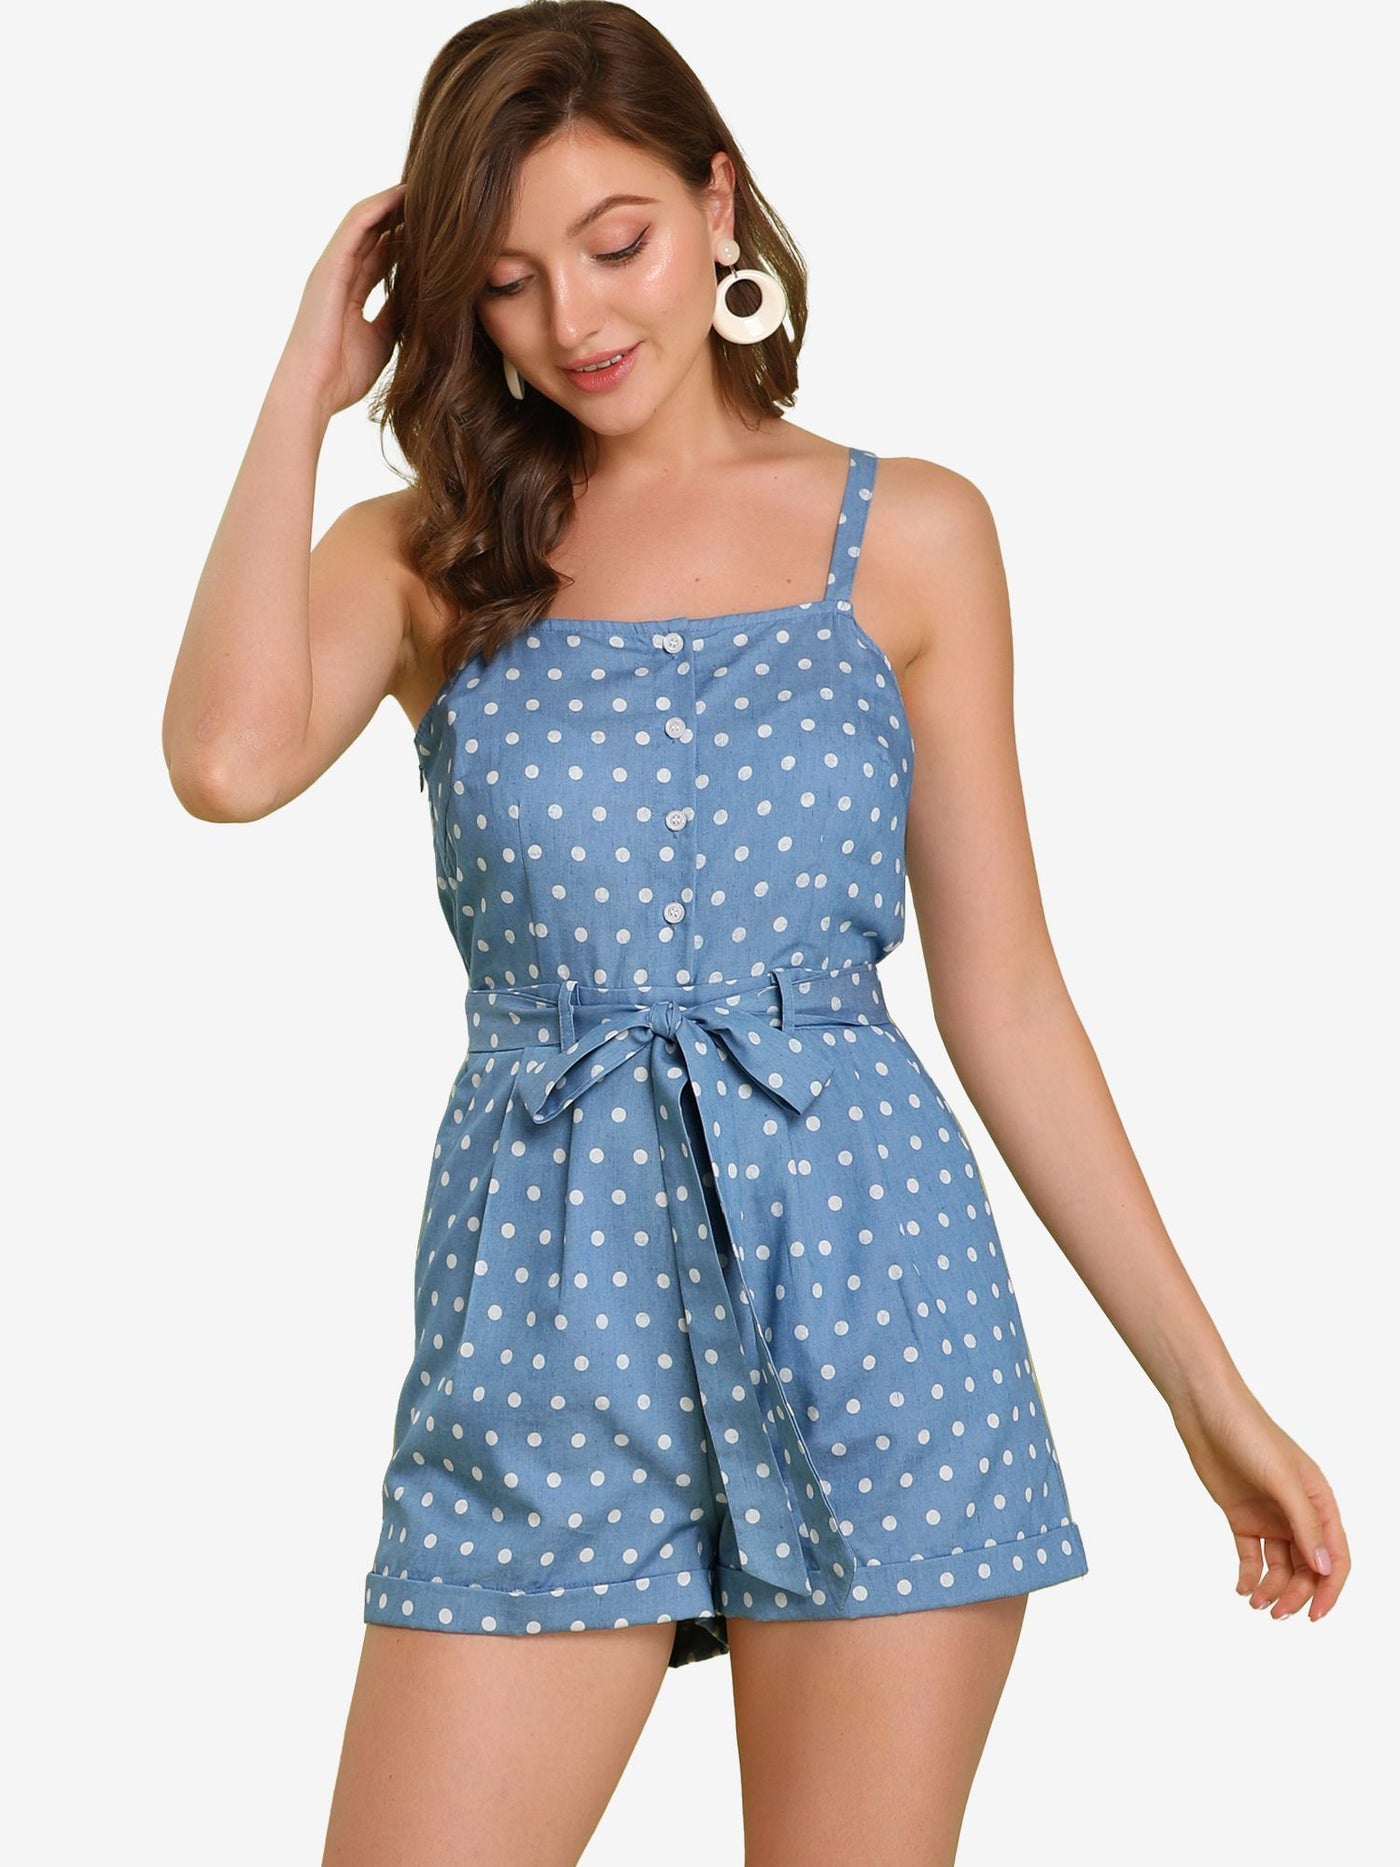 Allegra K Short Overalls Chambray Sleeveless Jumpsuit Casual Print Rompers